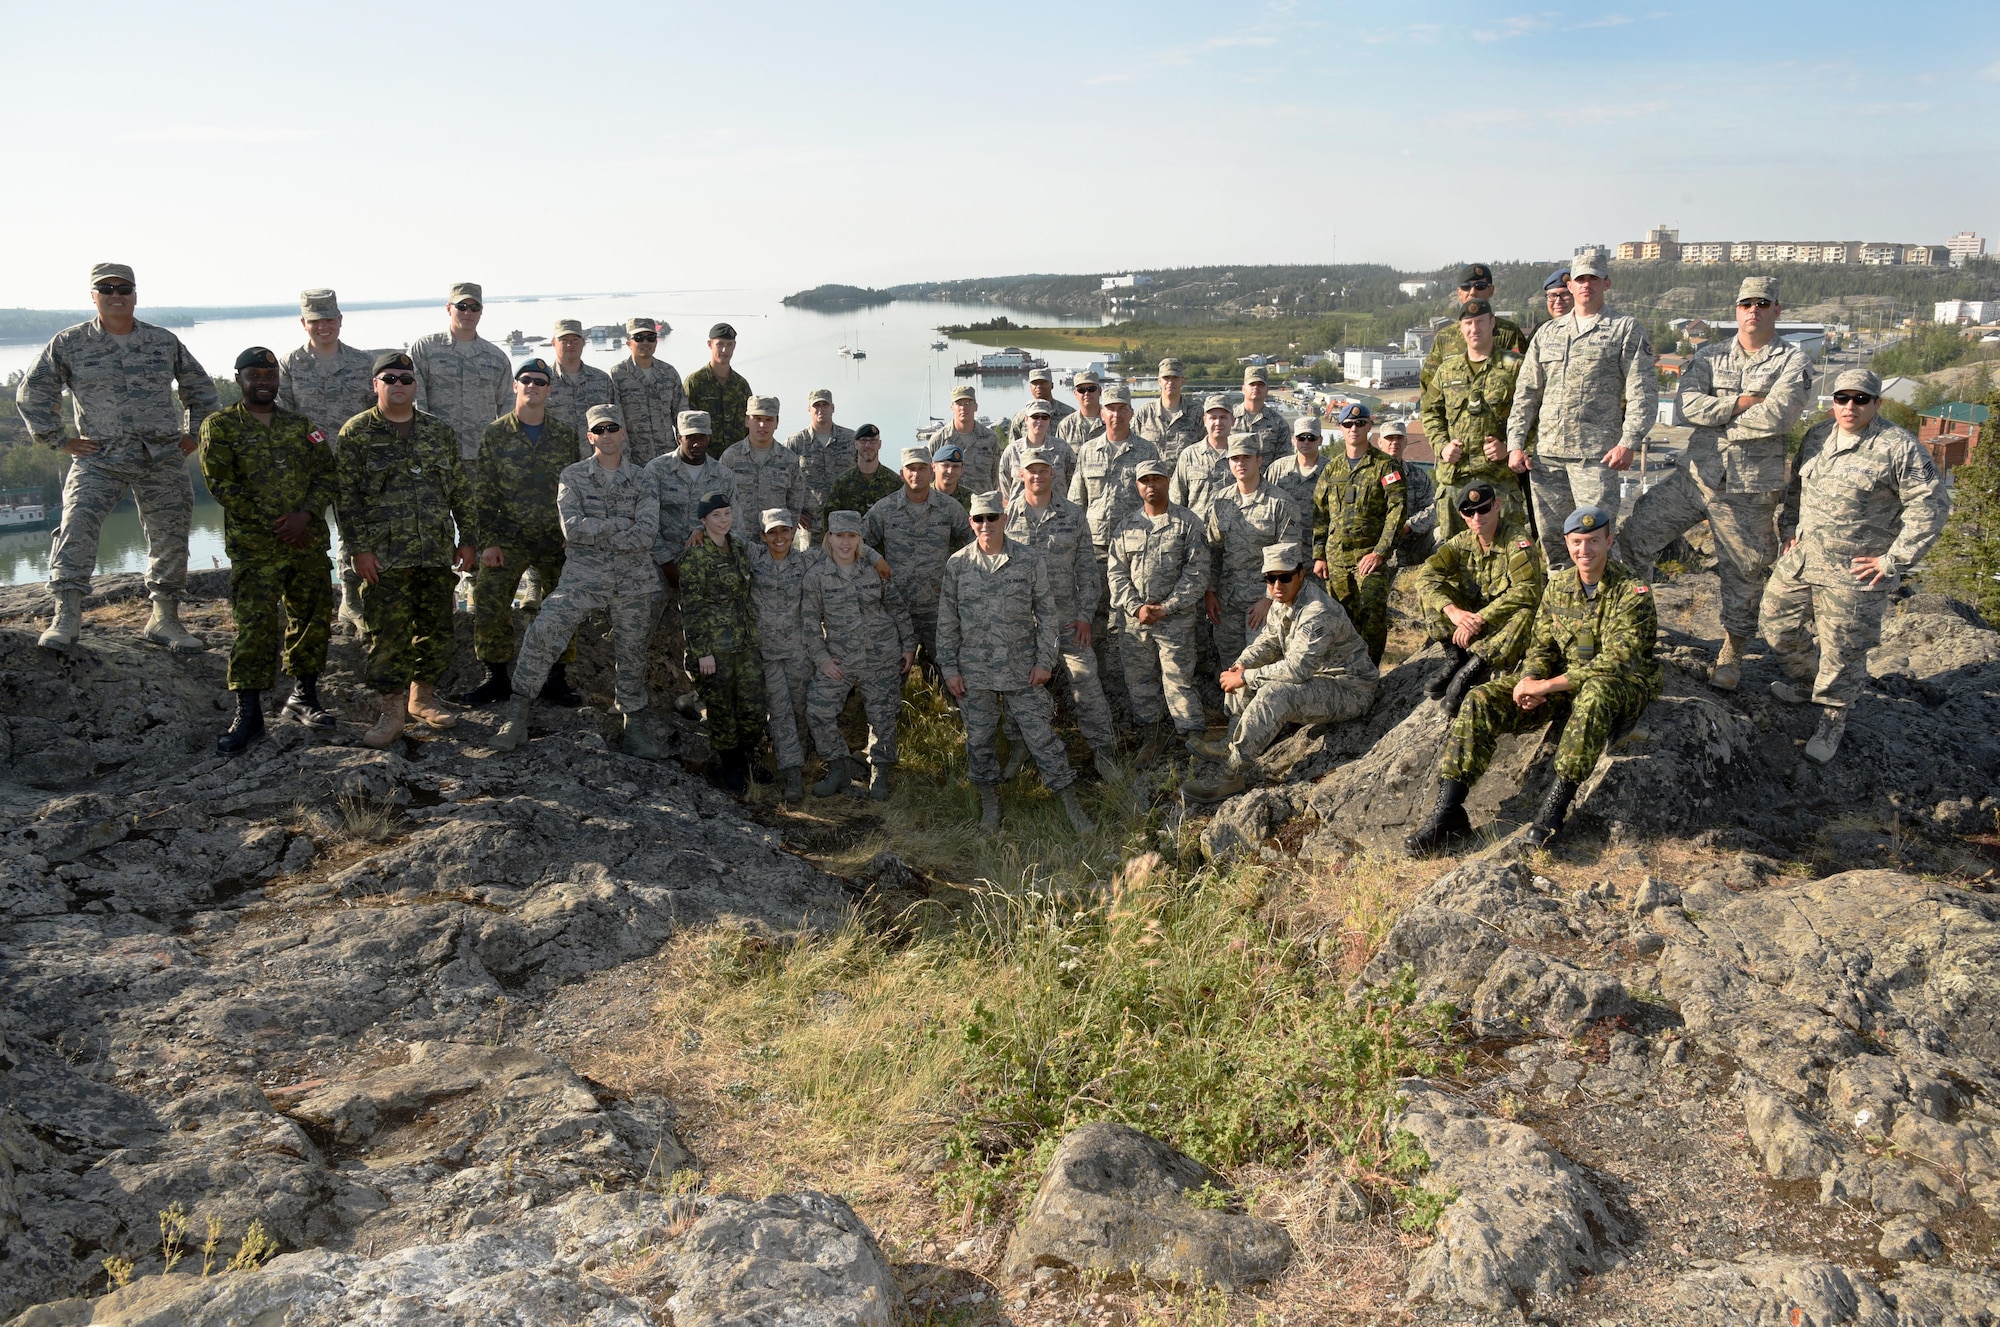 Oregon Air National Guardsmen from the 142nd Fighter Wing Civil Engineer Squadron (CES) along with Canadian Armed Forces Construction Engineers from Cold Lake, Alberta, gather for a group photograph after their two-week Deployment for Training assigment in Yellowknife, Northwest Territories, Canada, July 26, 2017. (U.S. Air National Guard photo/Master Sgt. John Hughel)